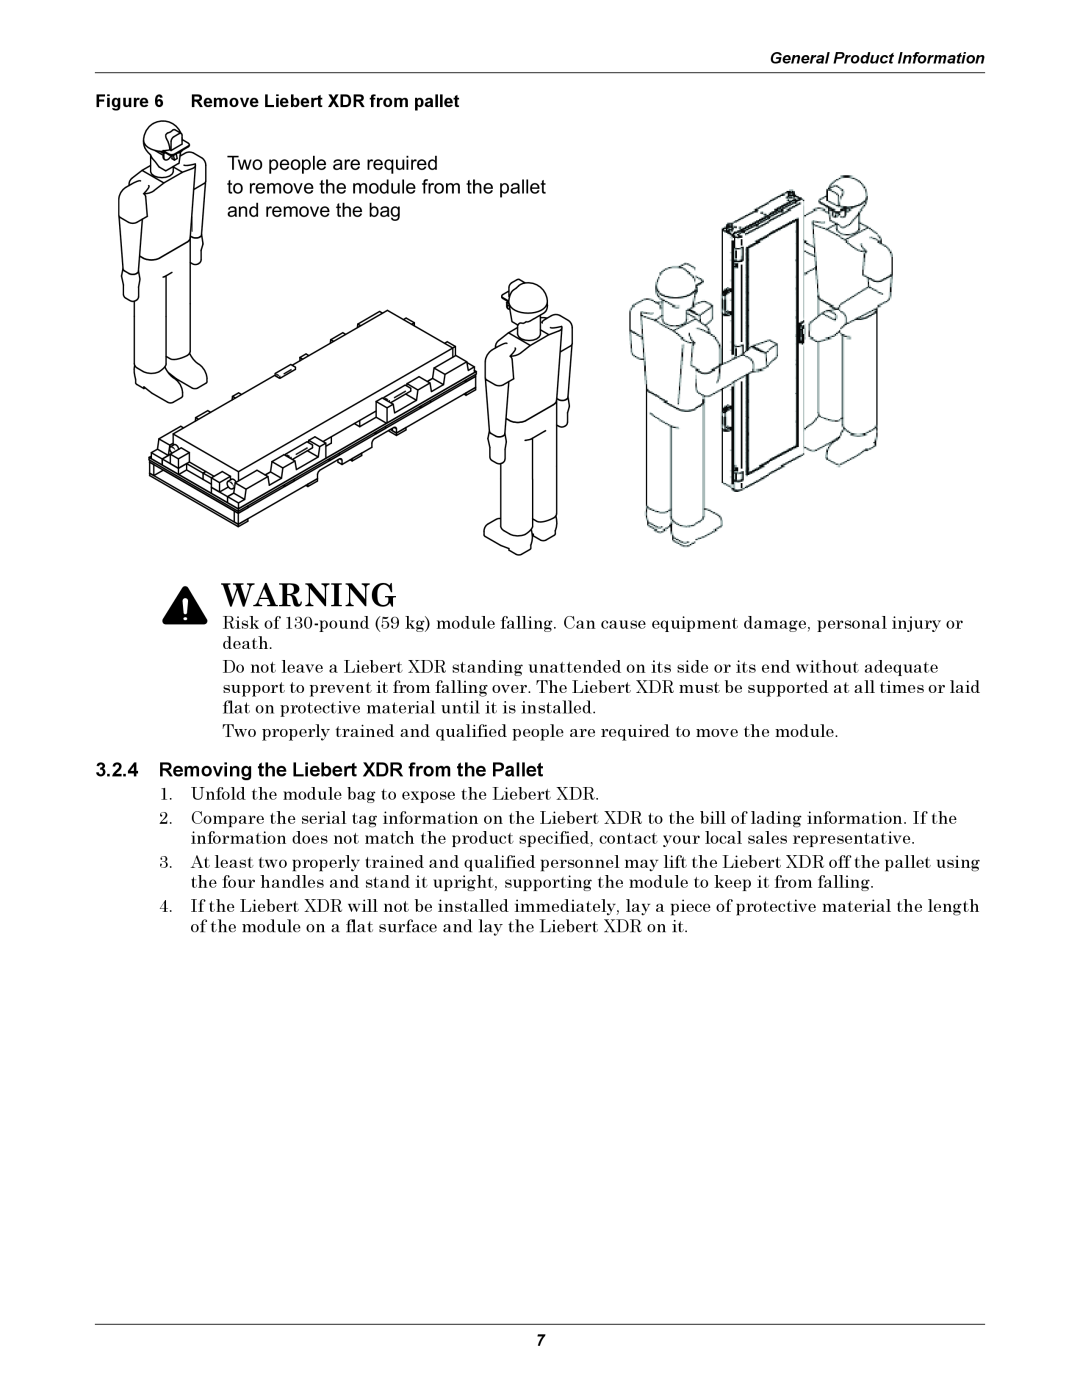 Emerson user manual Two people are required, 3.2.4Removing the Liebert XDR from the Pallet 